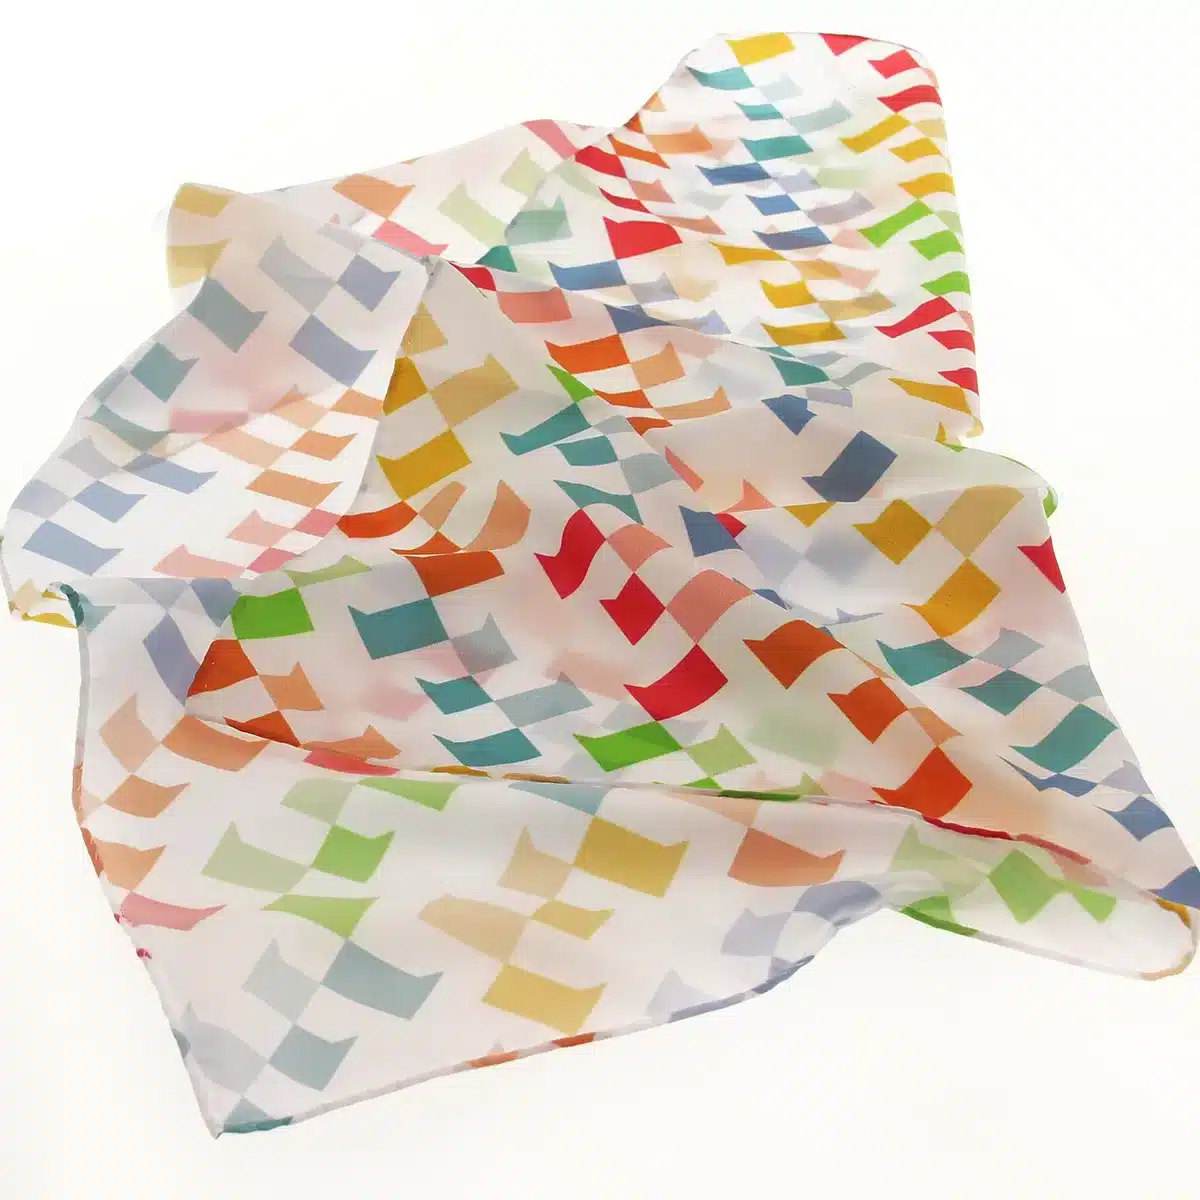 polyester scarves printed in full color